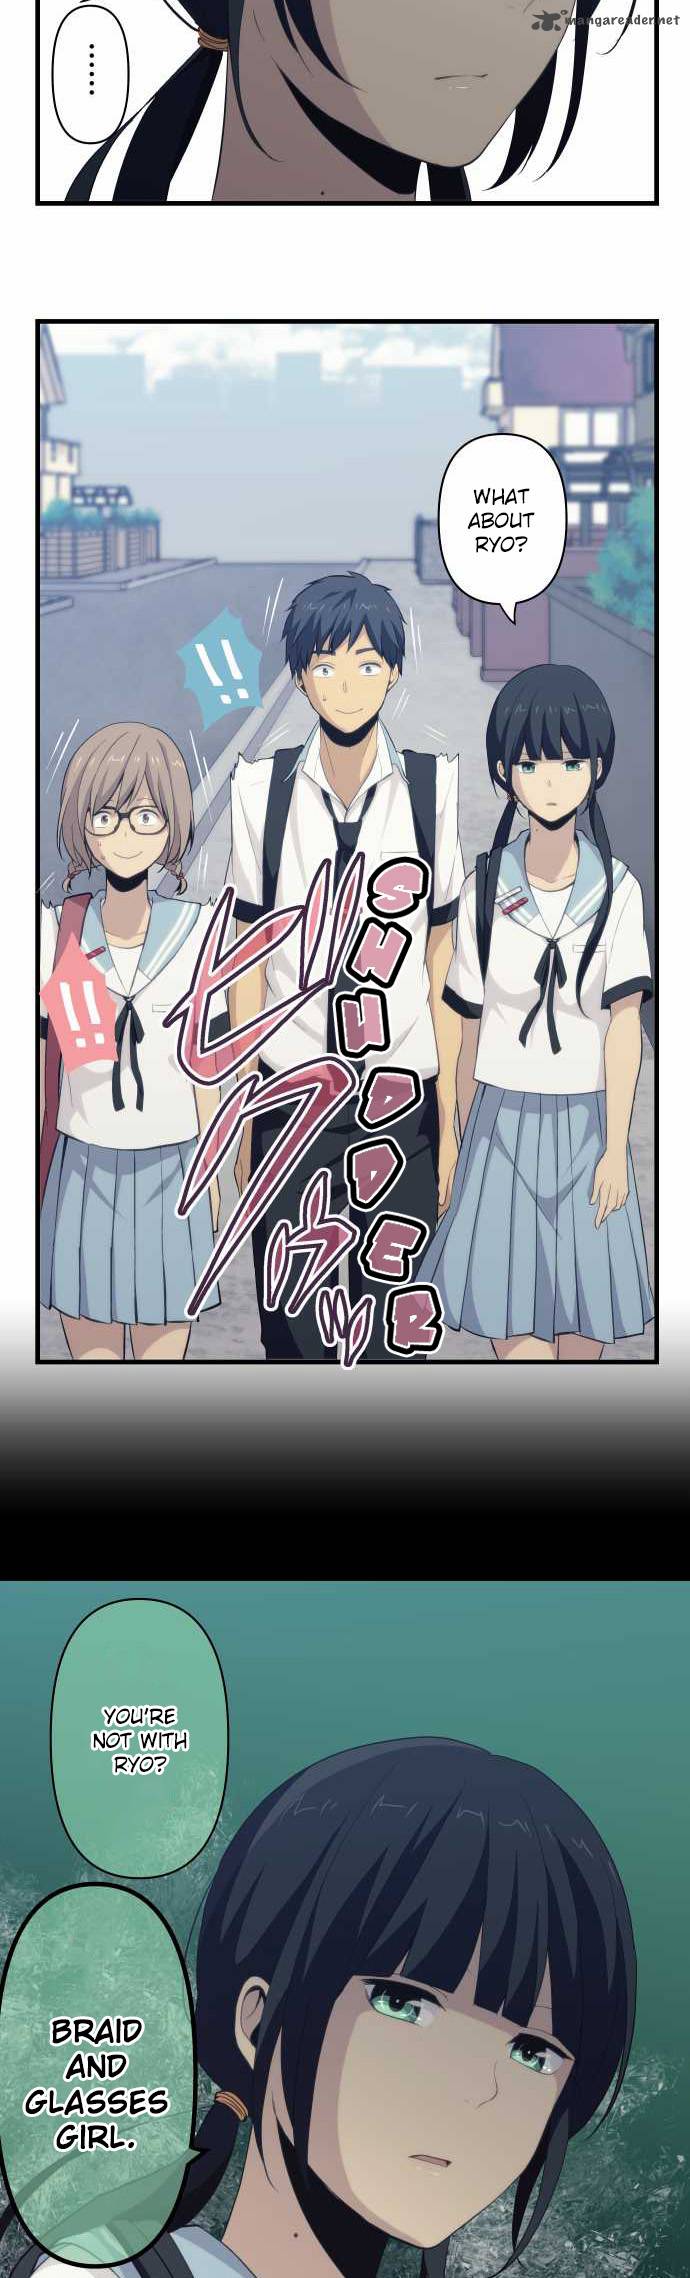 Relife Chapter 85 Page 6